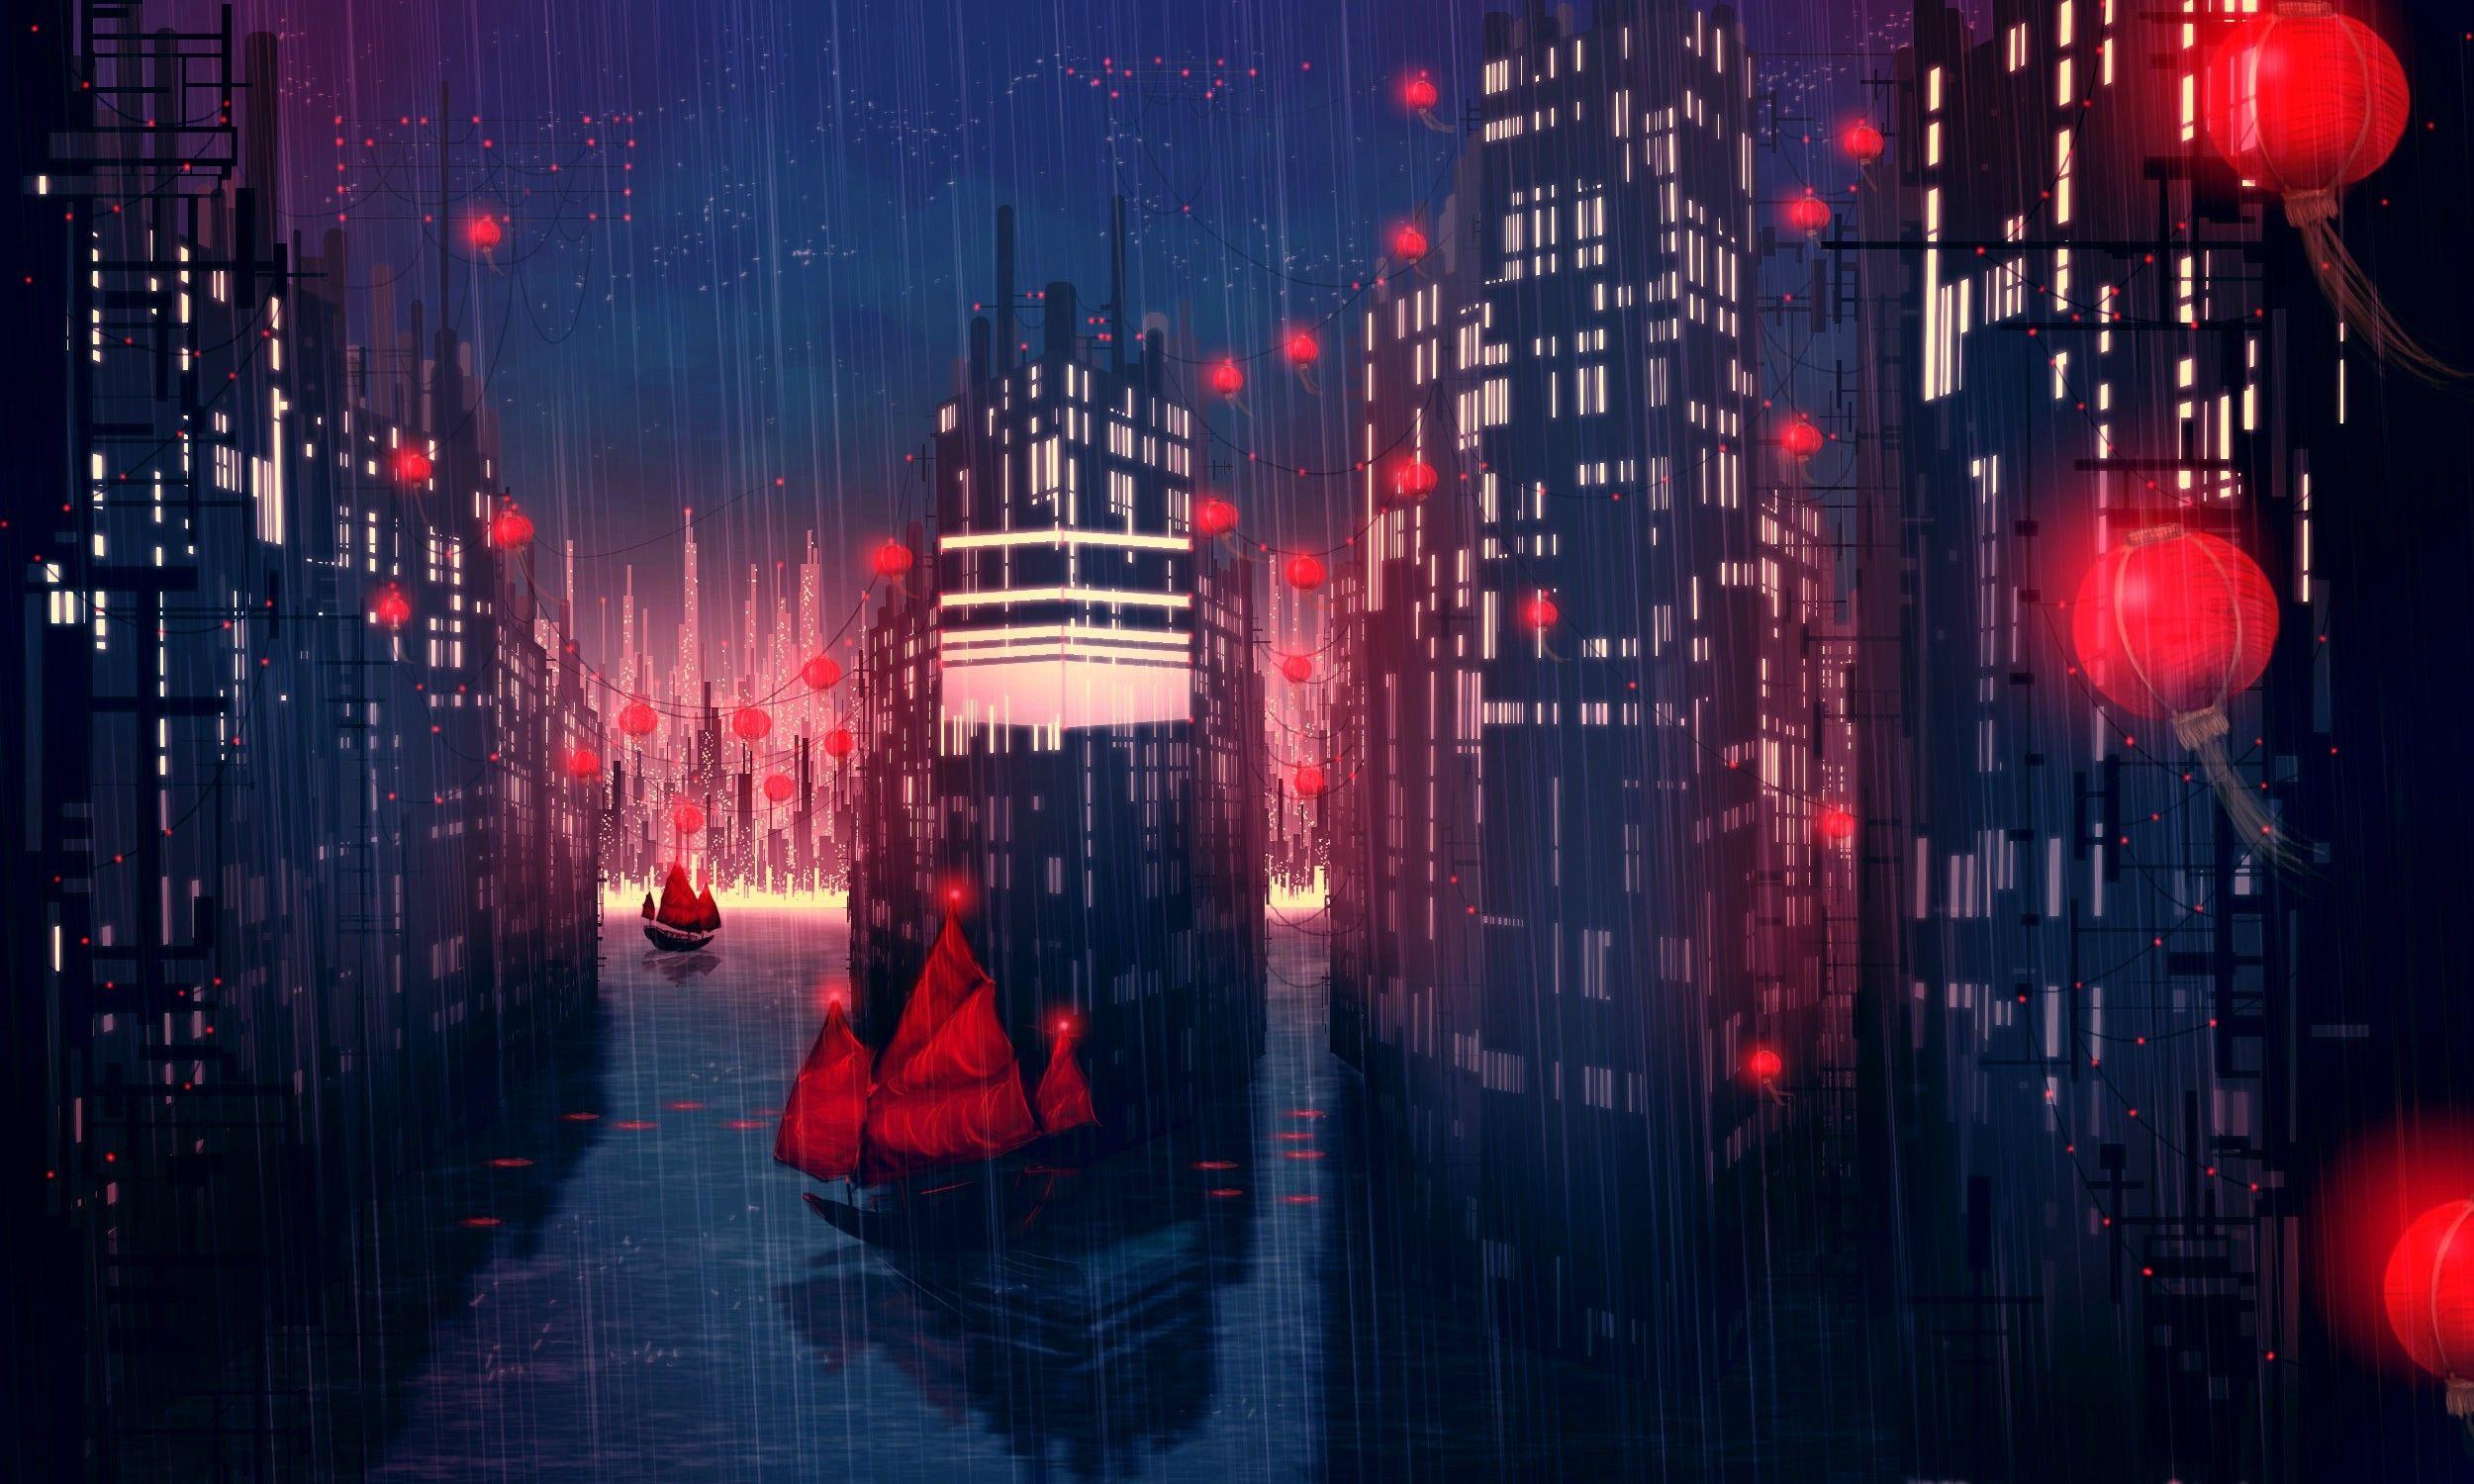 Akira Neo Tokyo Wallpaper Collection [Enhanced and Radified) : r